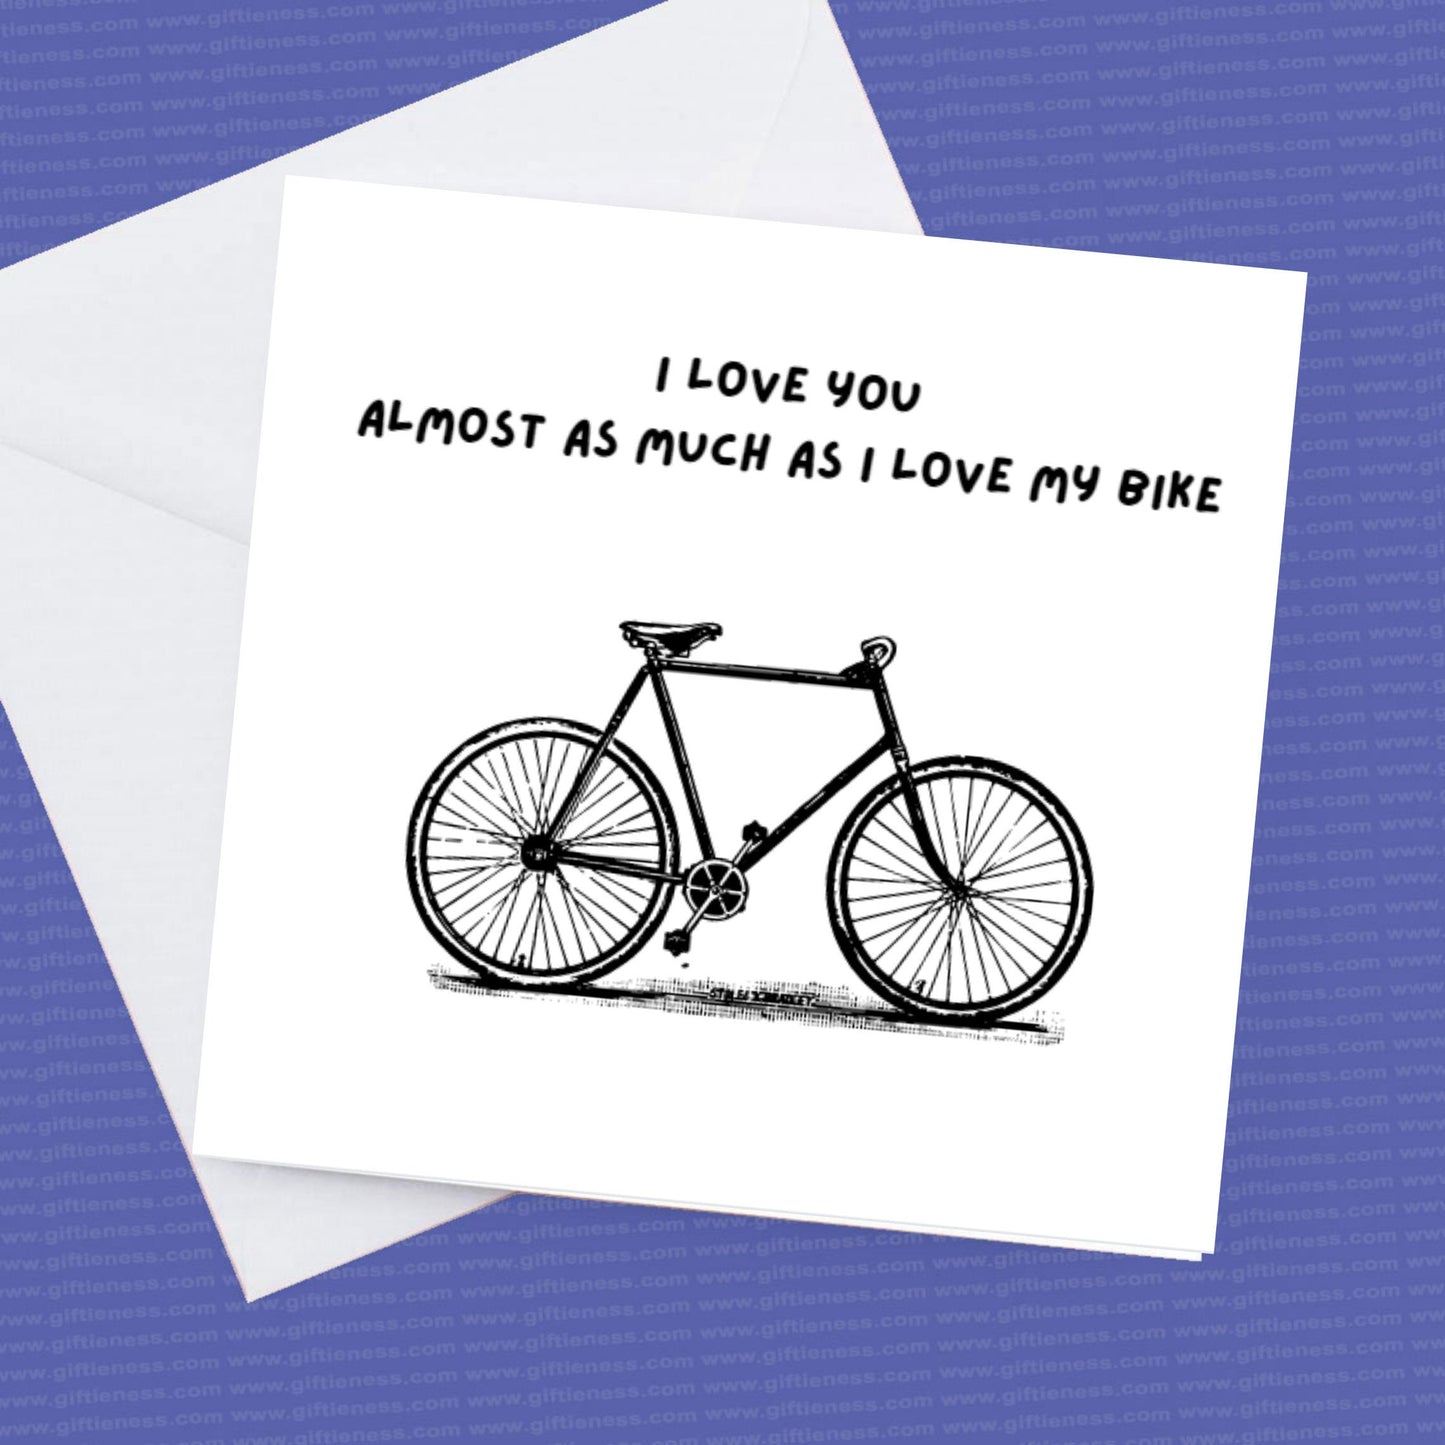 I love you almost as much as I love my bike